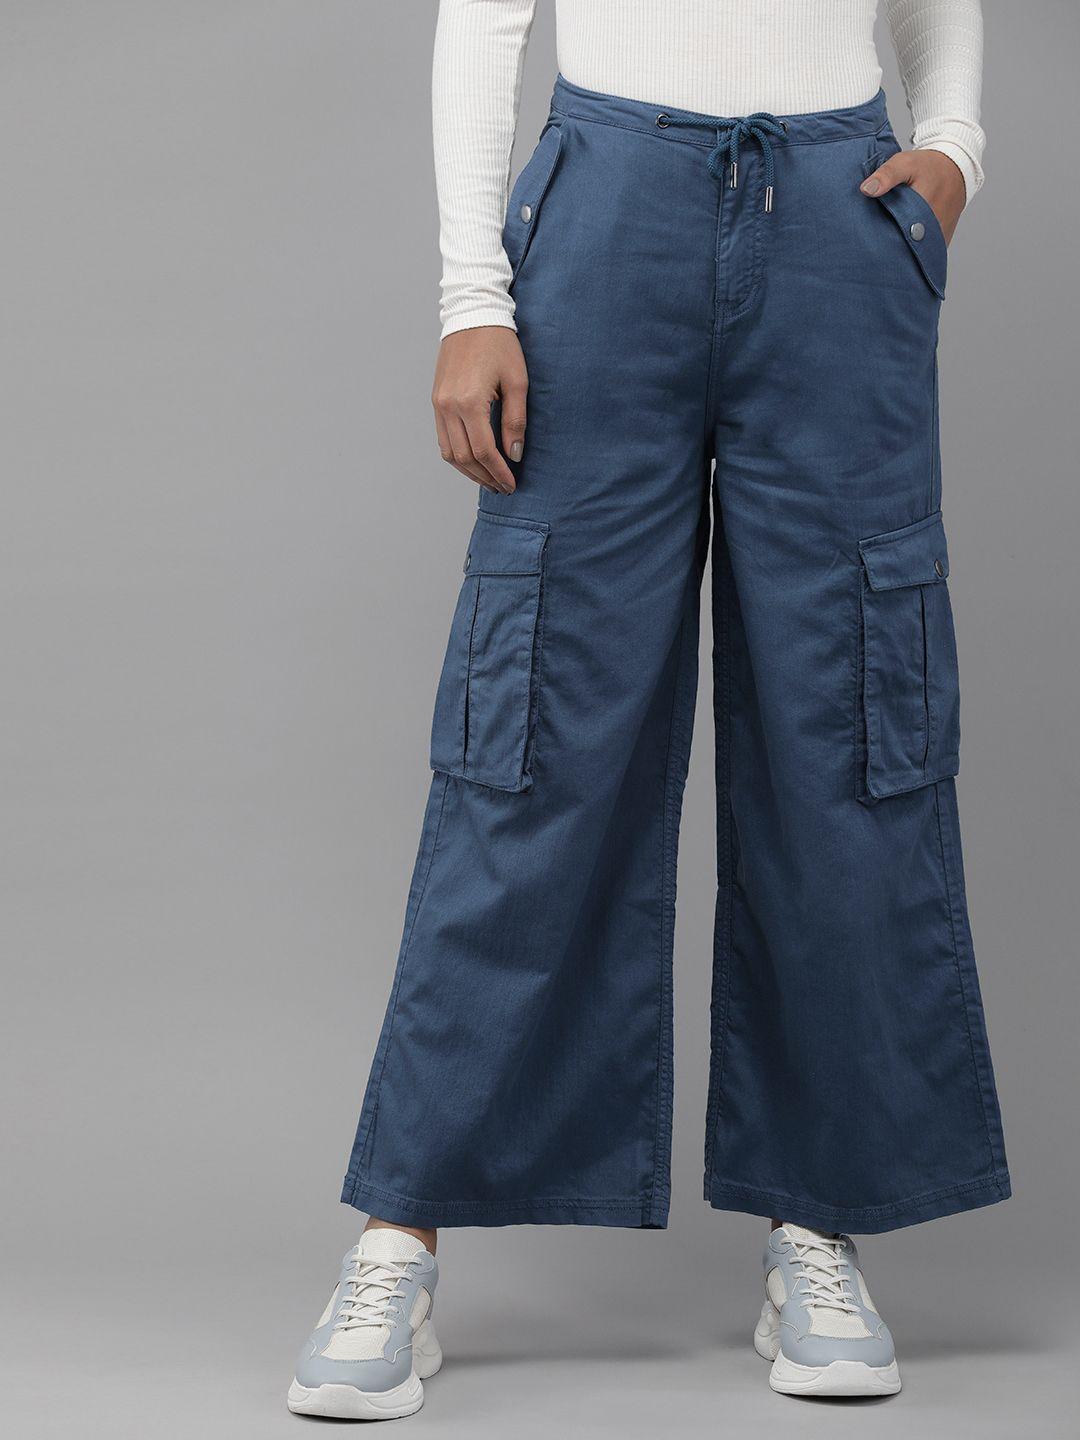 the roadster lifestyle co. women flared cargos trousers with drawstring closure